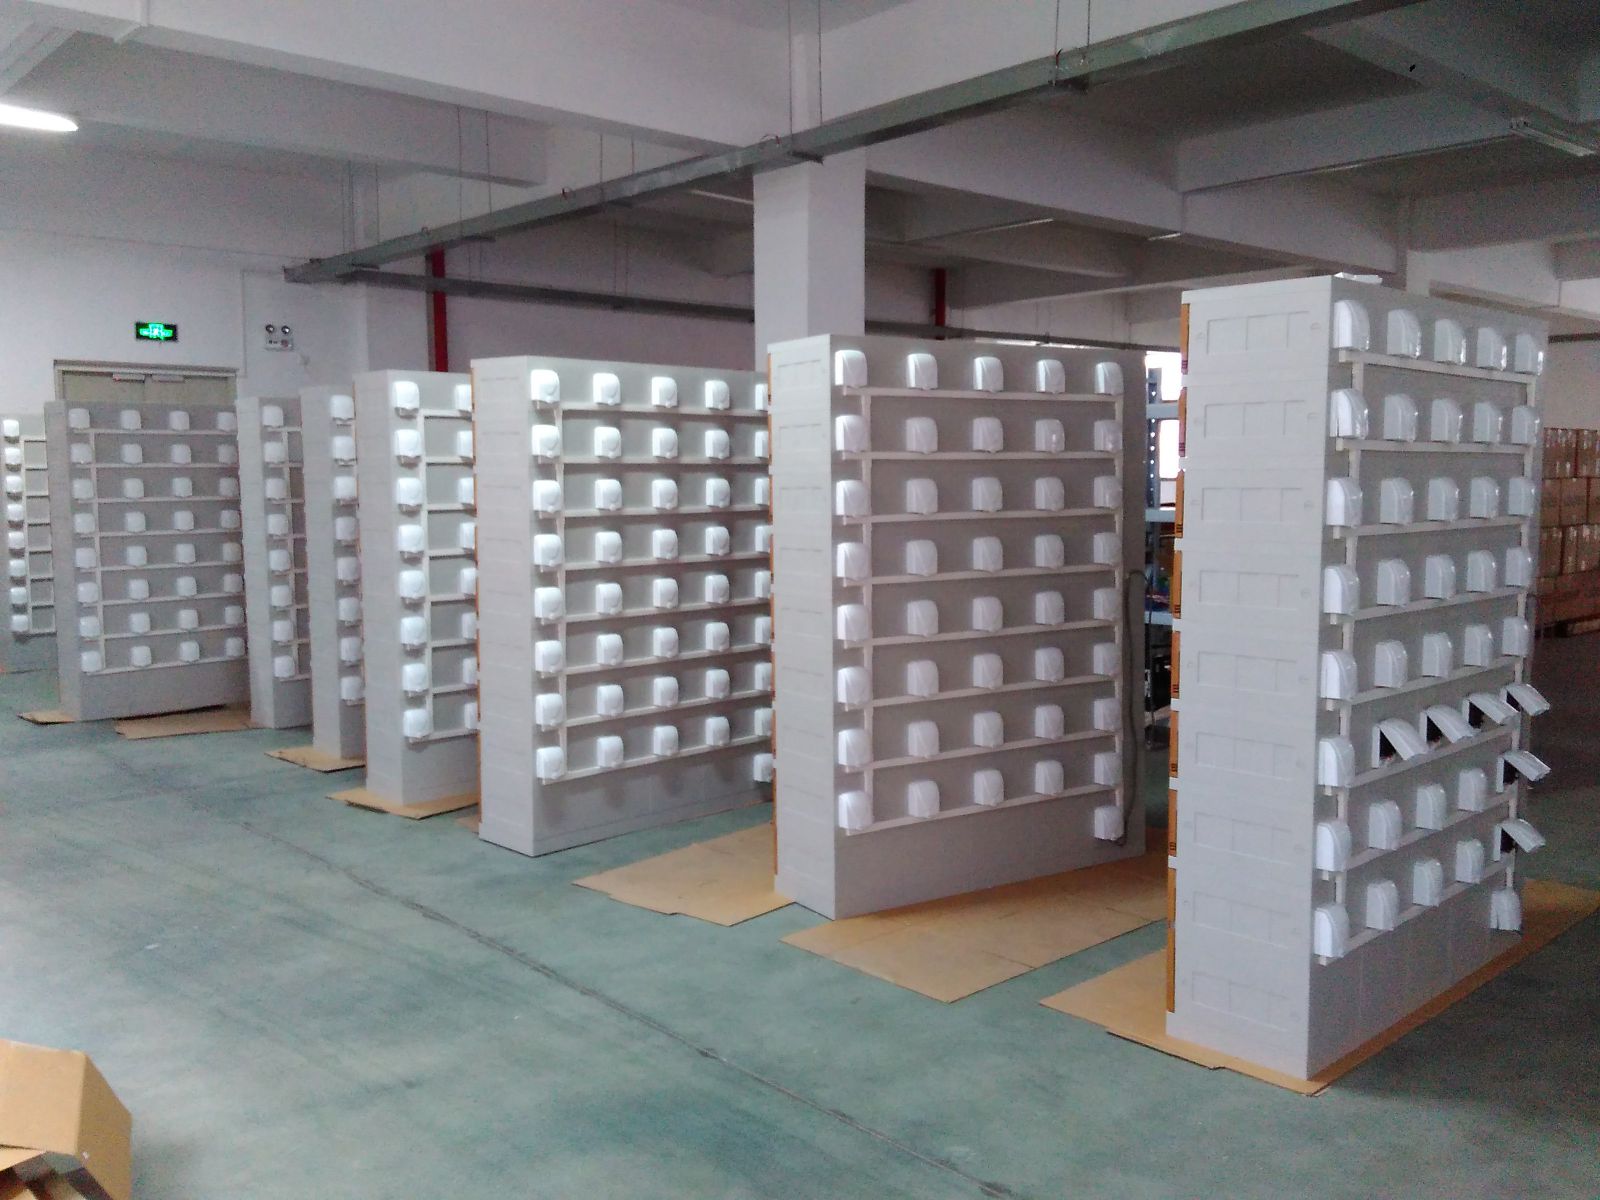 Charging Lockers with High-quality Wires